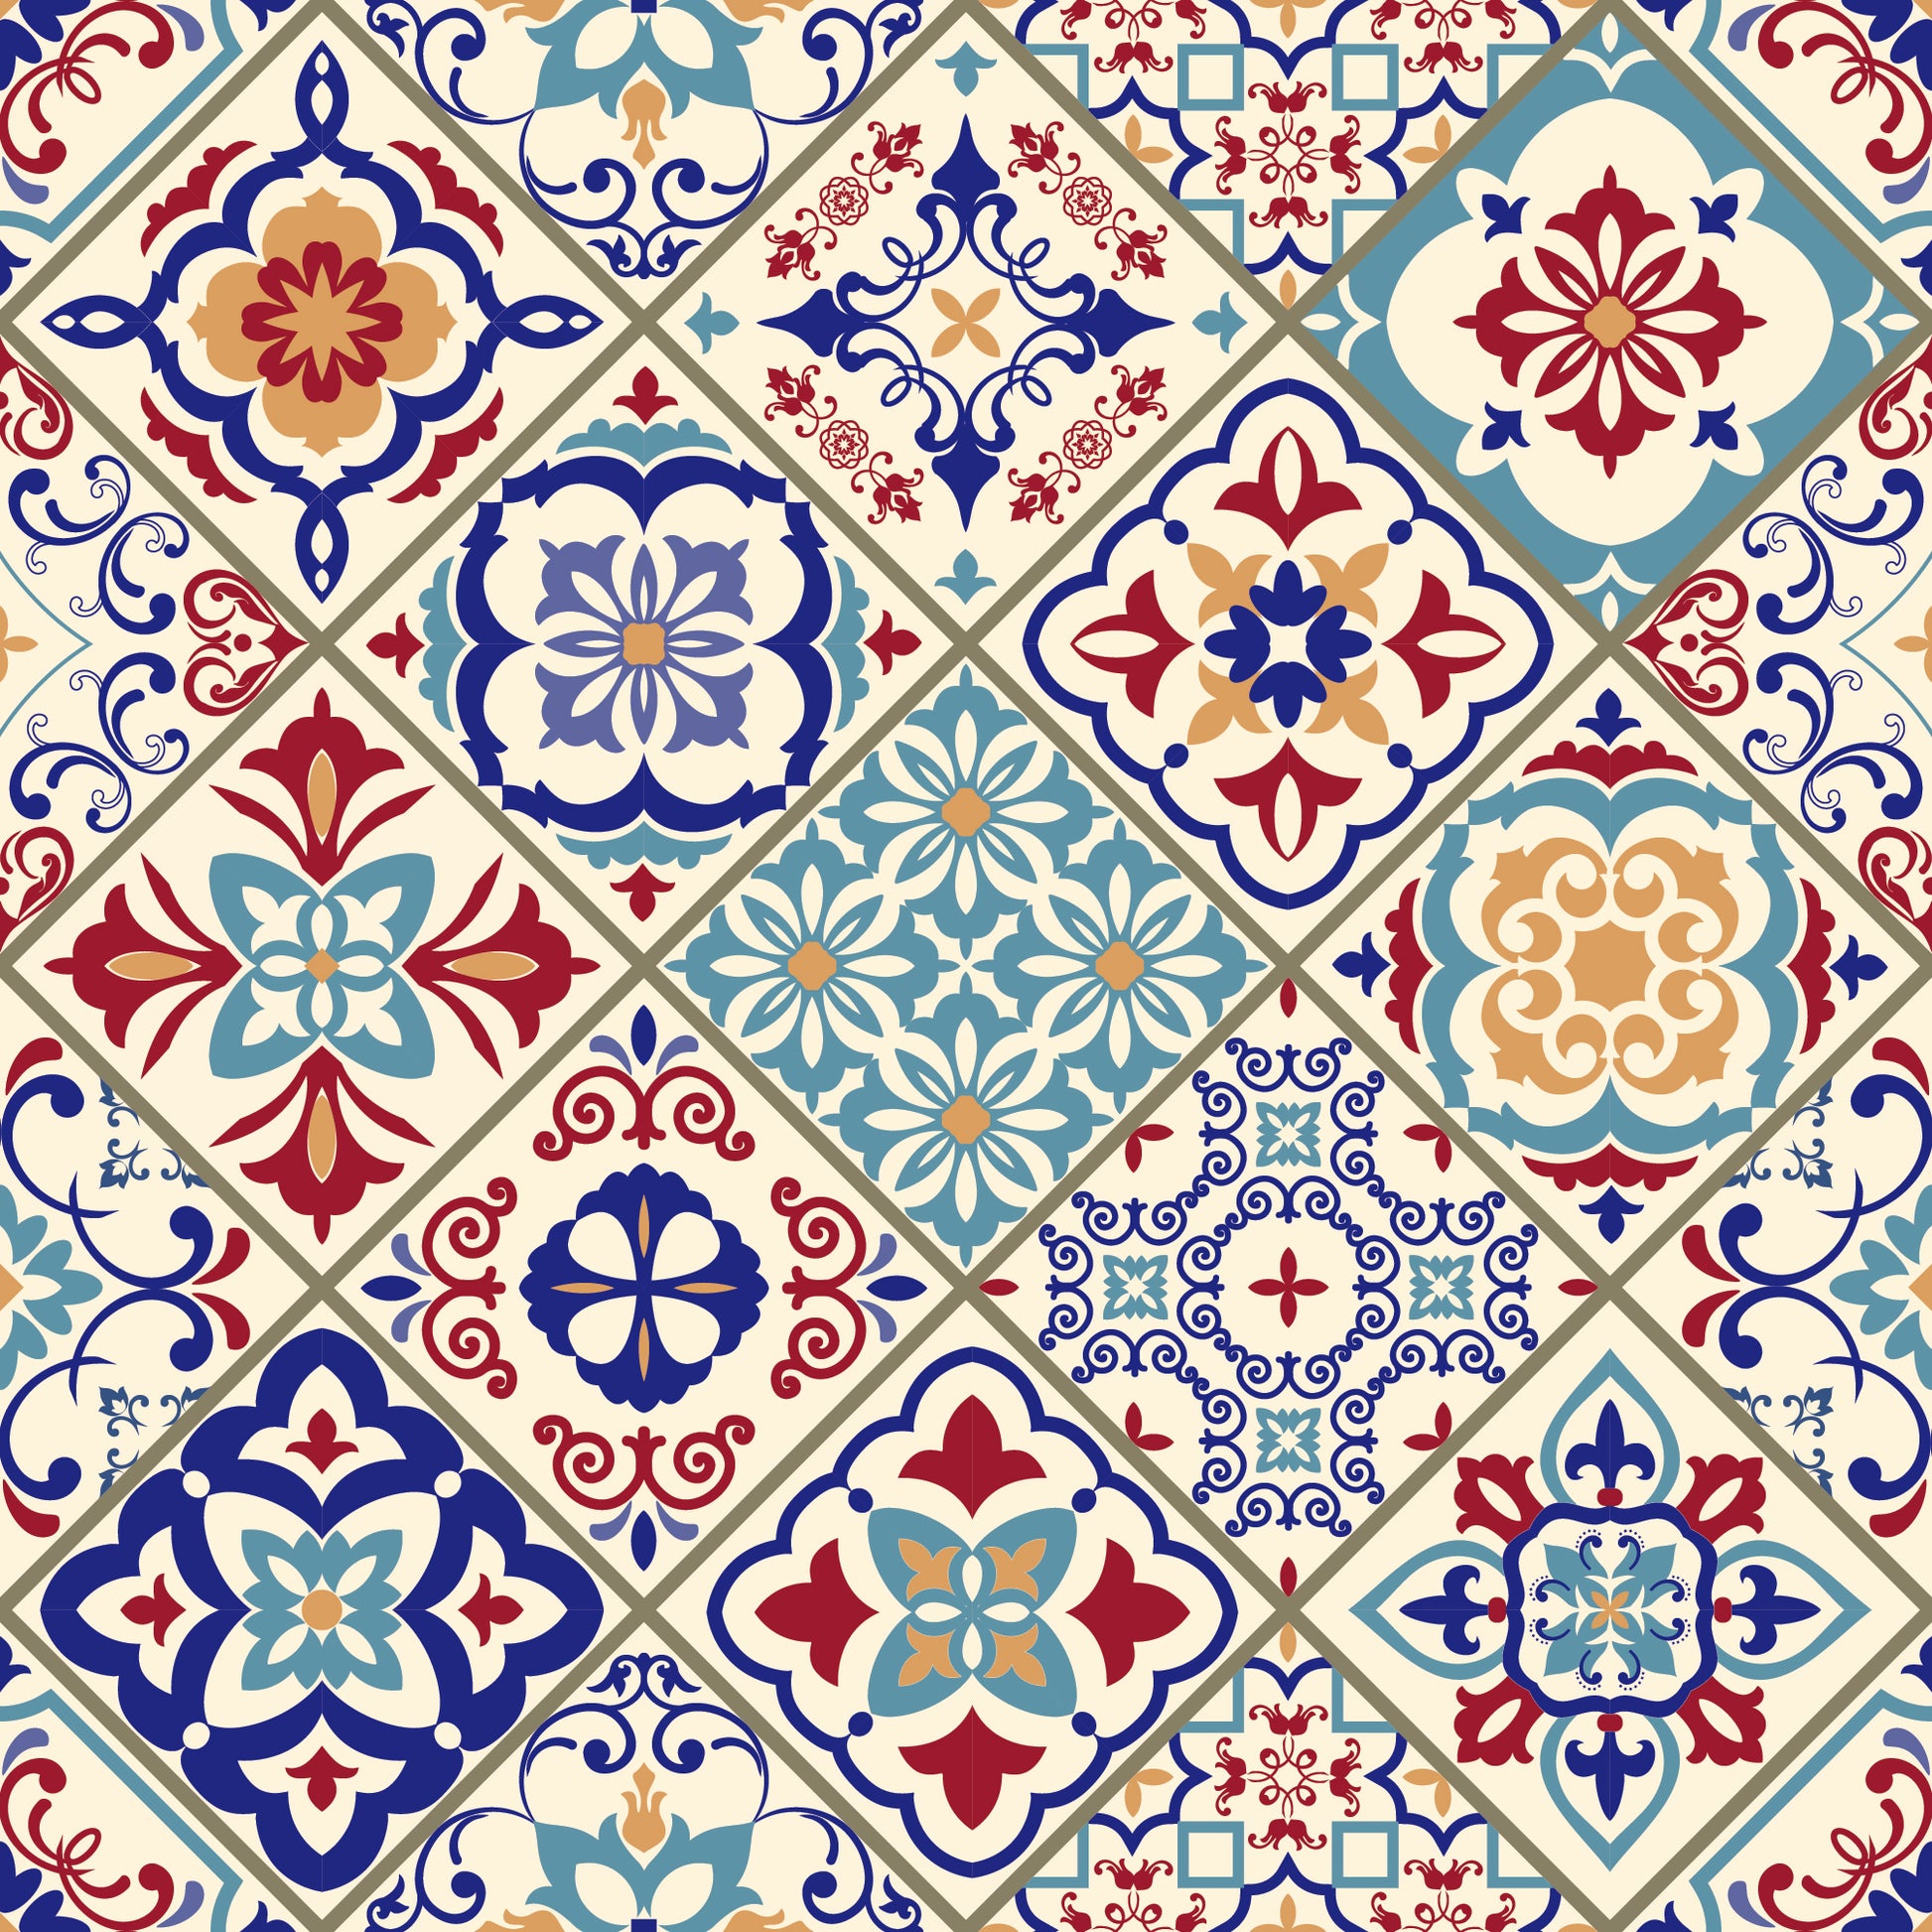 Codelic Bright Colourful Traditional Tile Pattern Printed on Premium Vinyl For Wrapping Desks, Tables, Kitchens, Bathrooms, Splashbacks, Fireplaces and more! Made in the UK by restowrap.